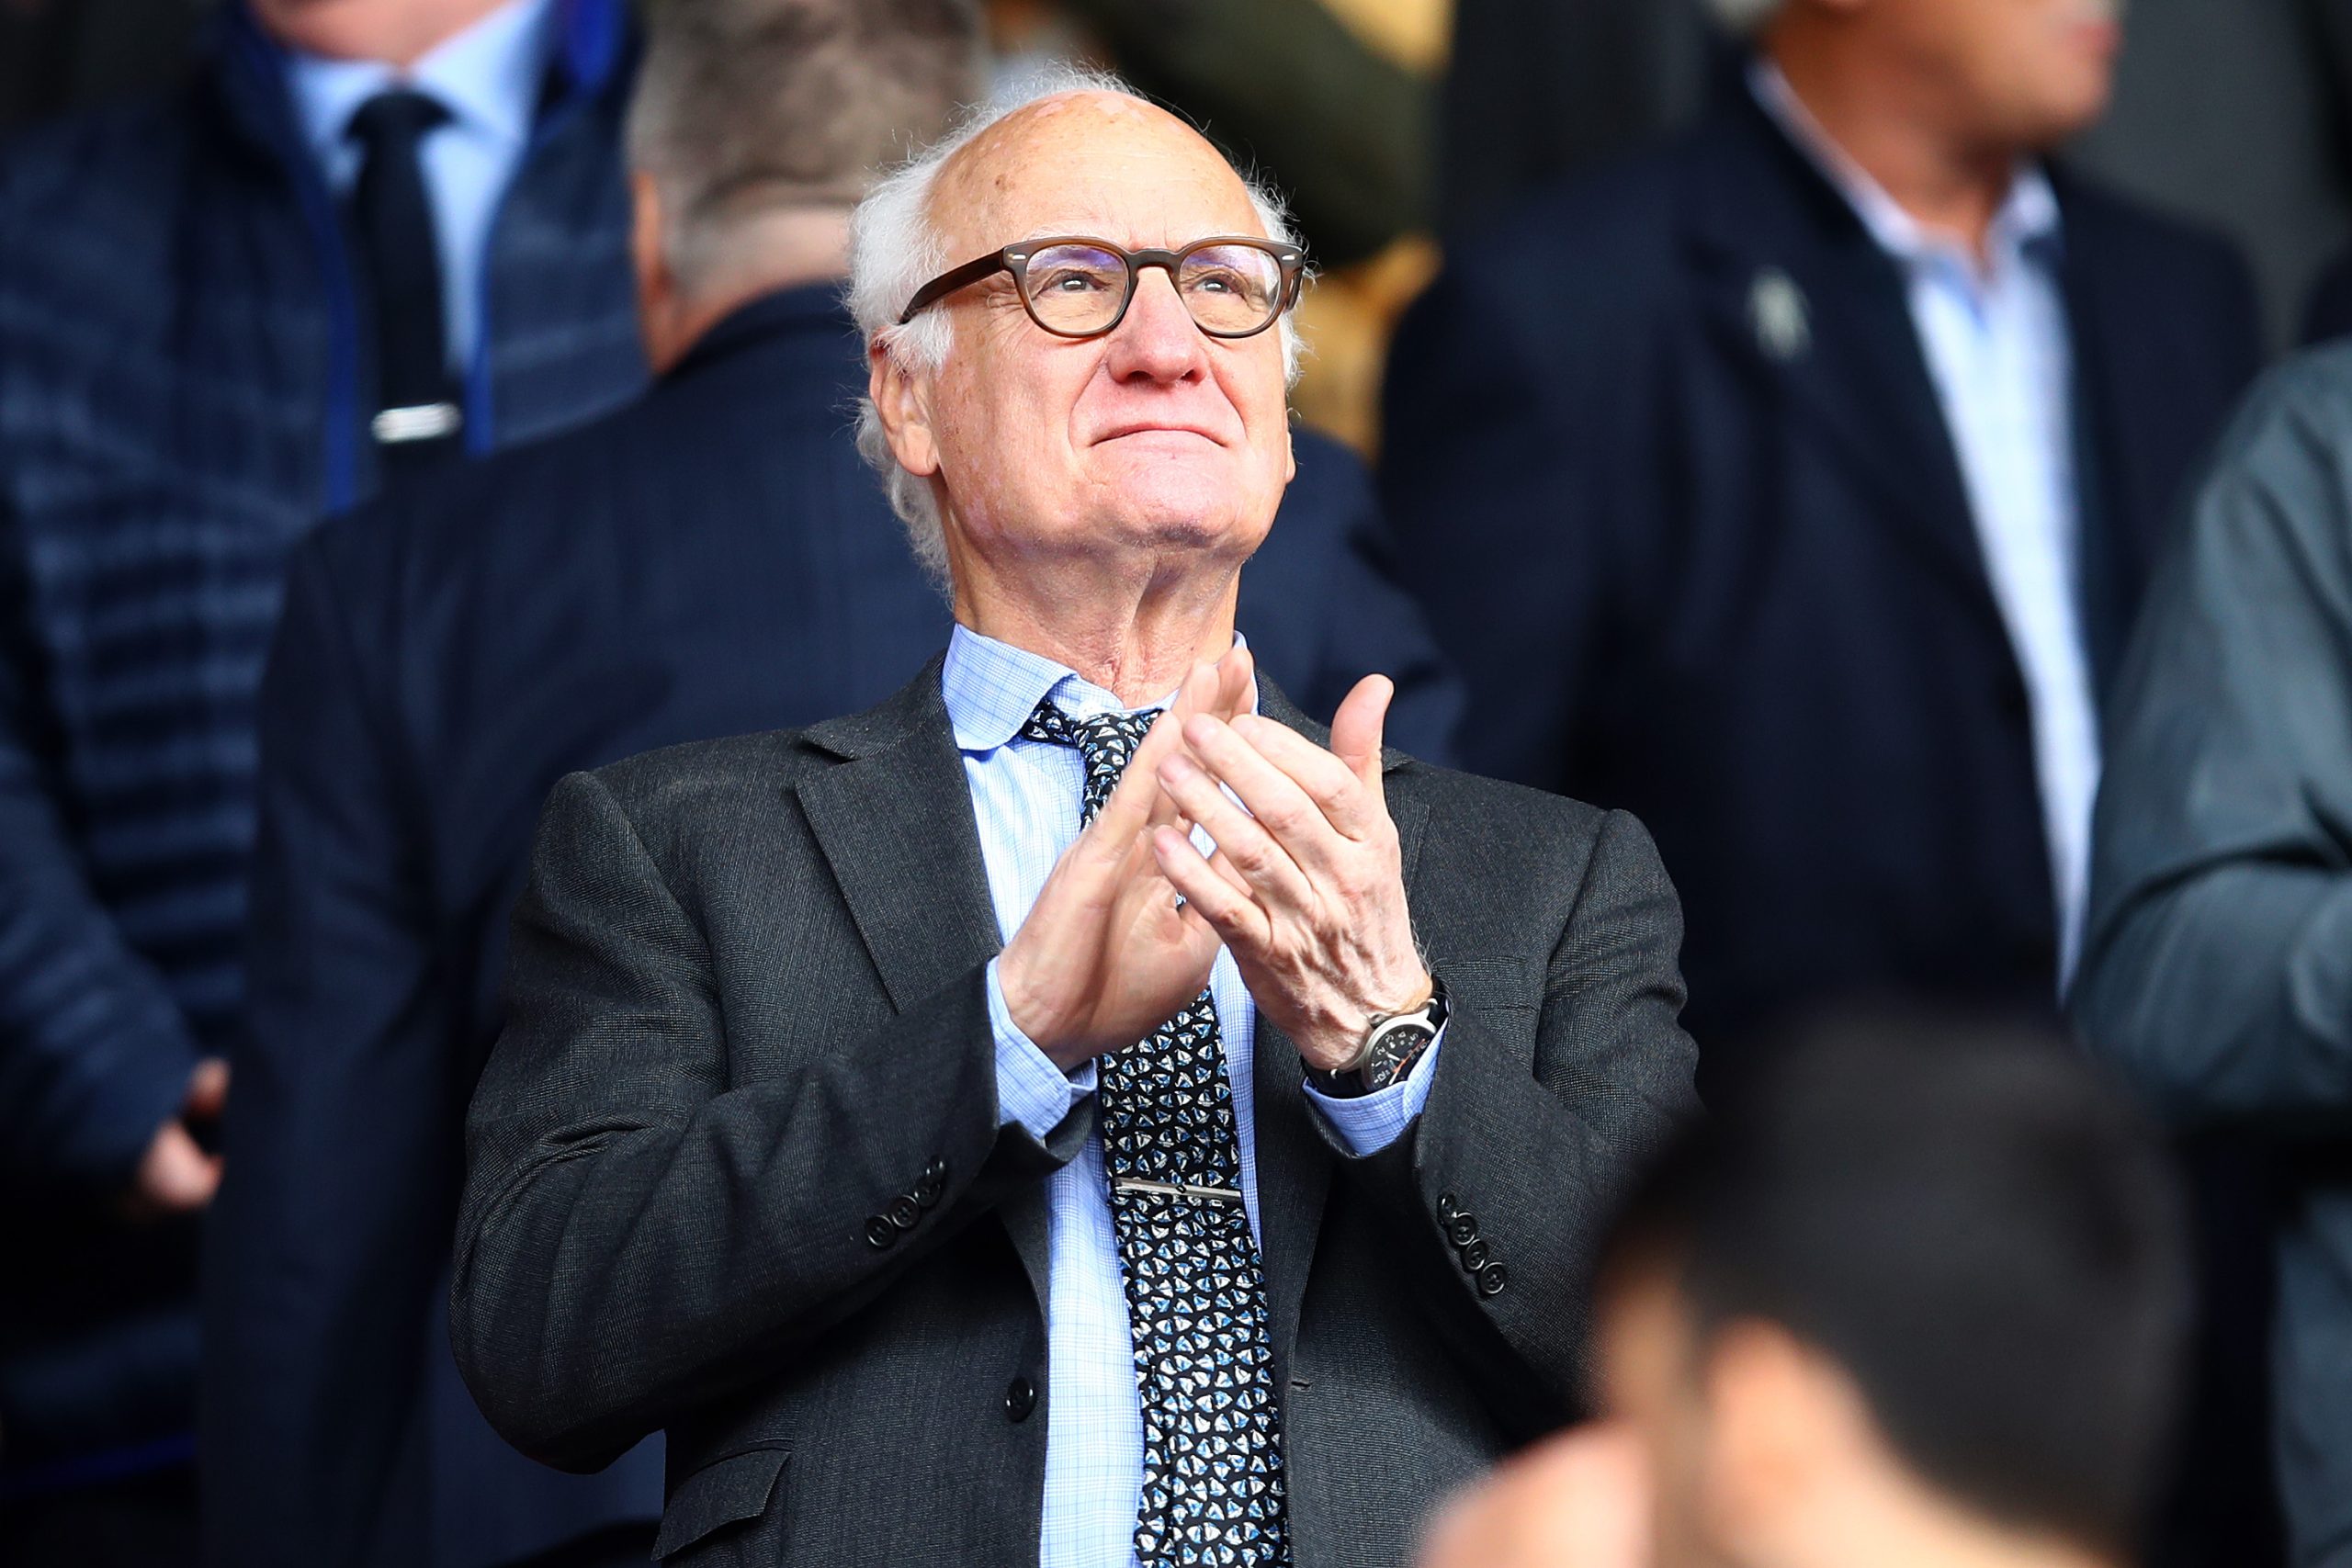 Bruce Buck to stay at Chelsea once takeover is complete. (Photo by Julian Finney/Getty Images)